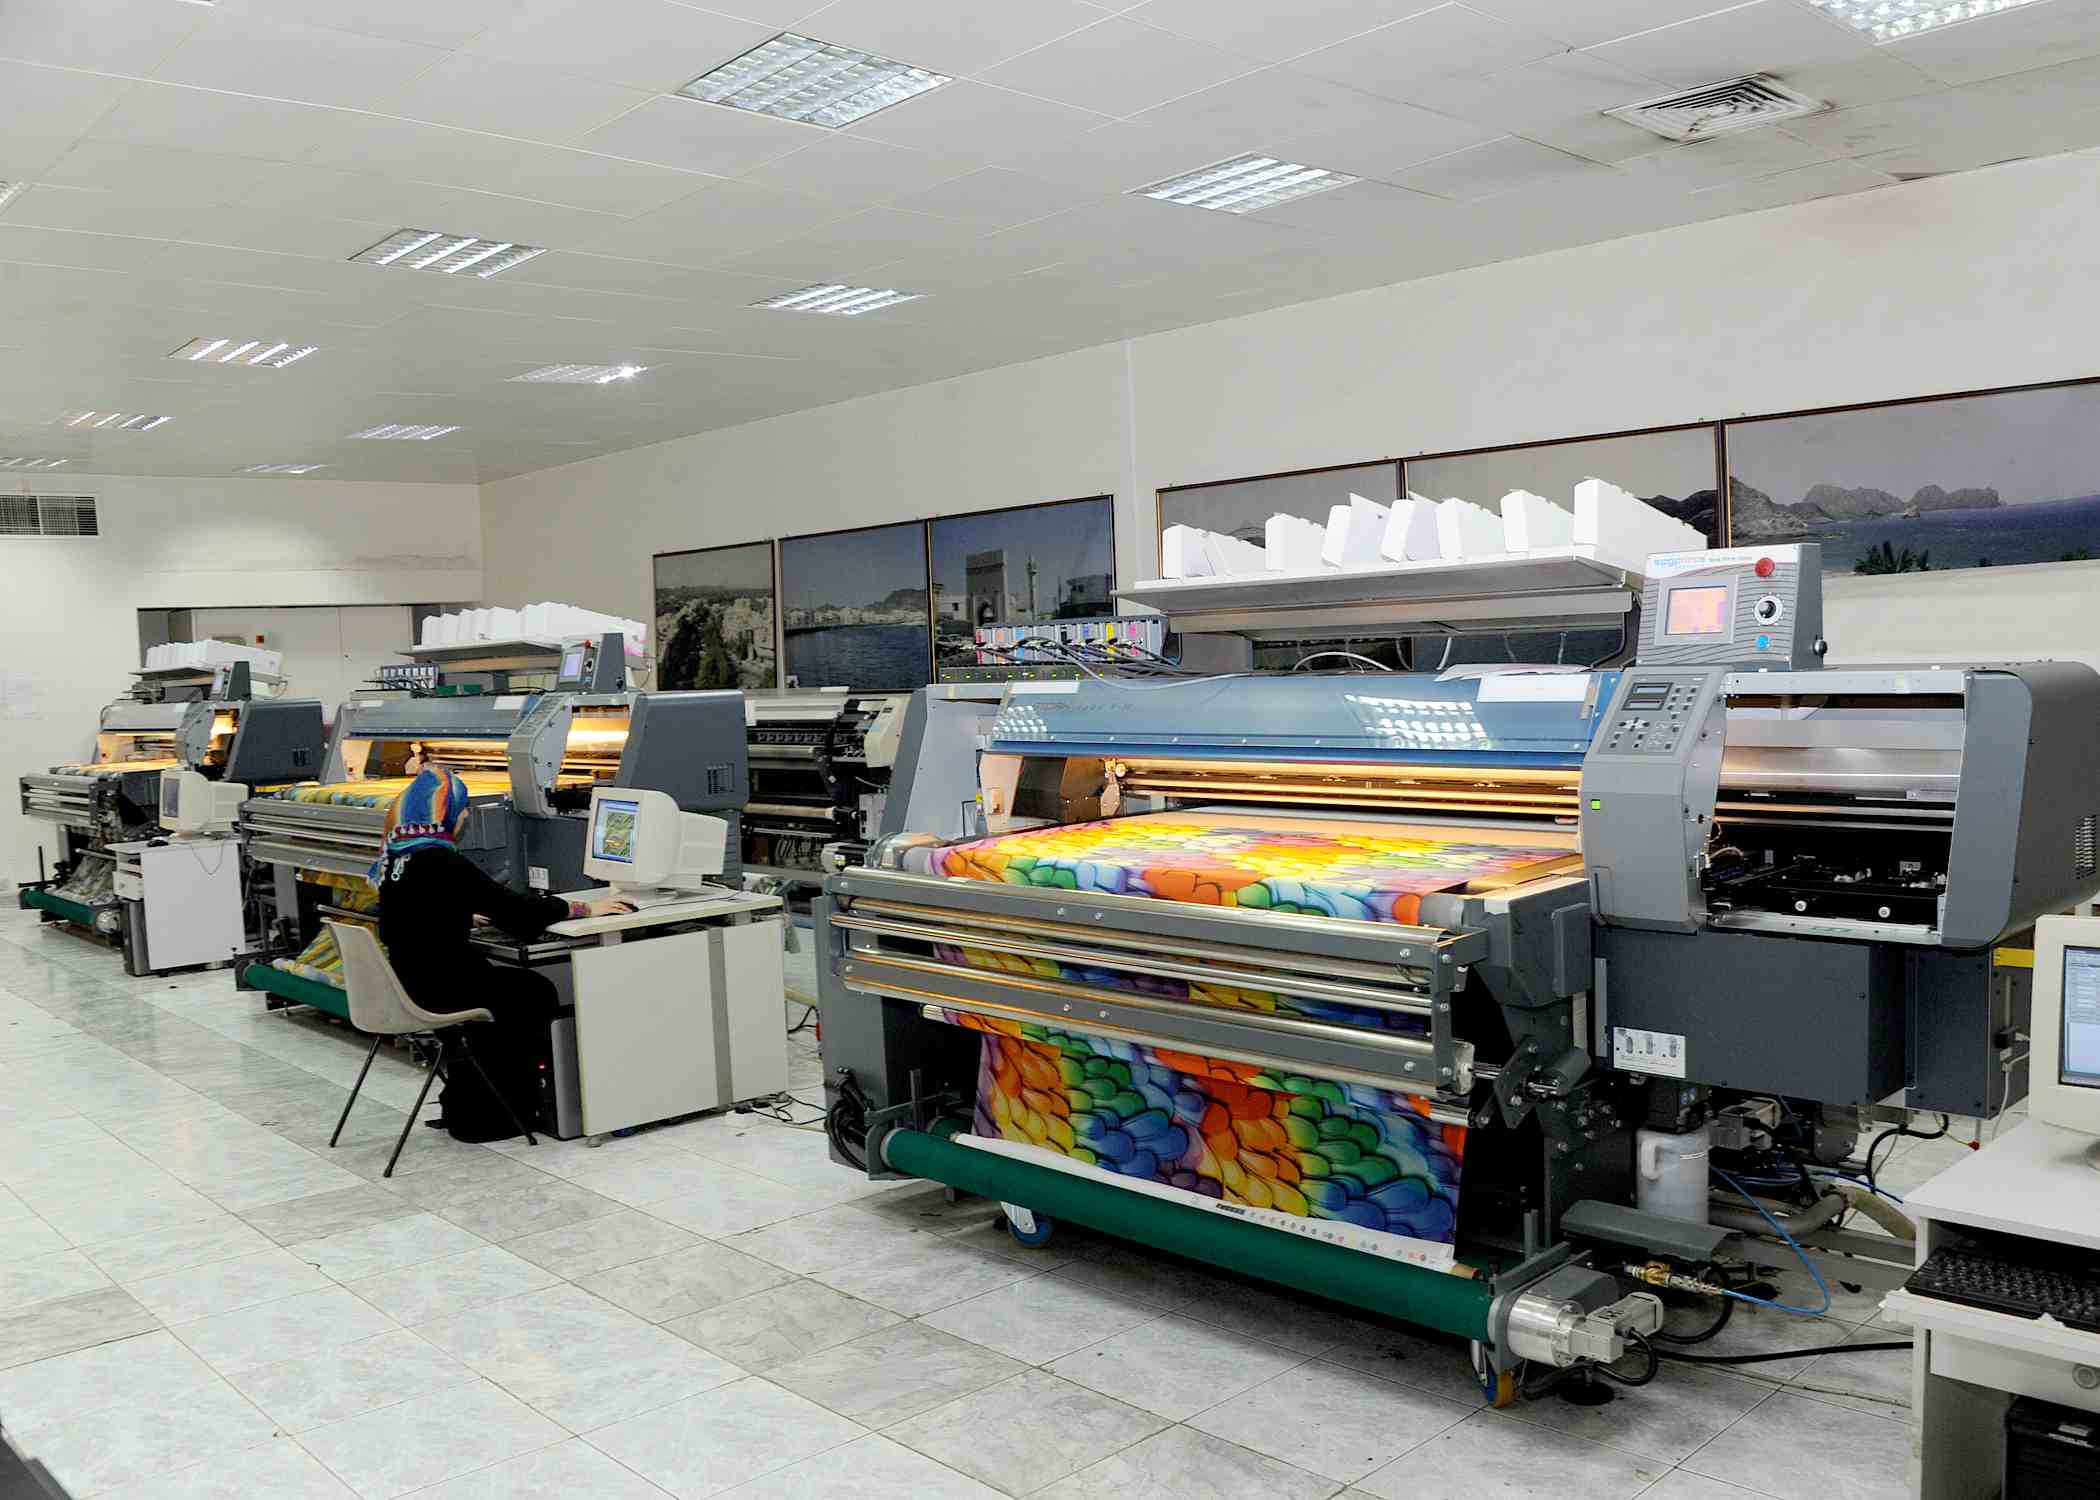 Reasons for using the digital printing by textile companies - All About Fashion